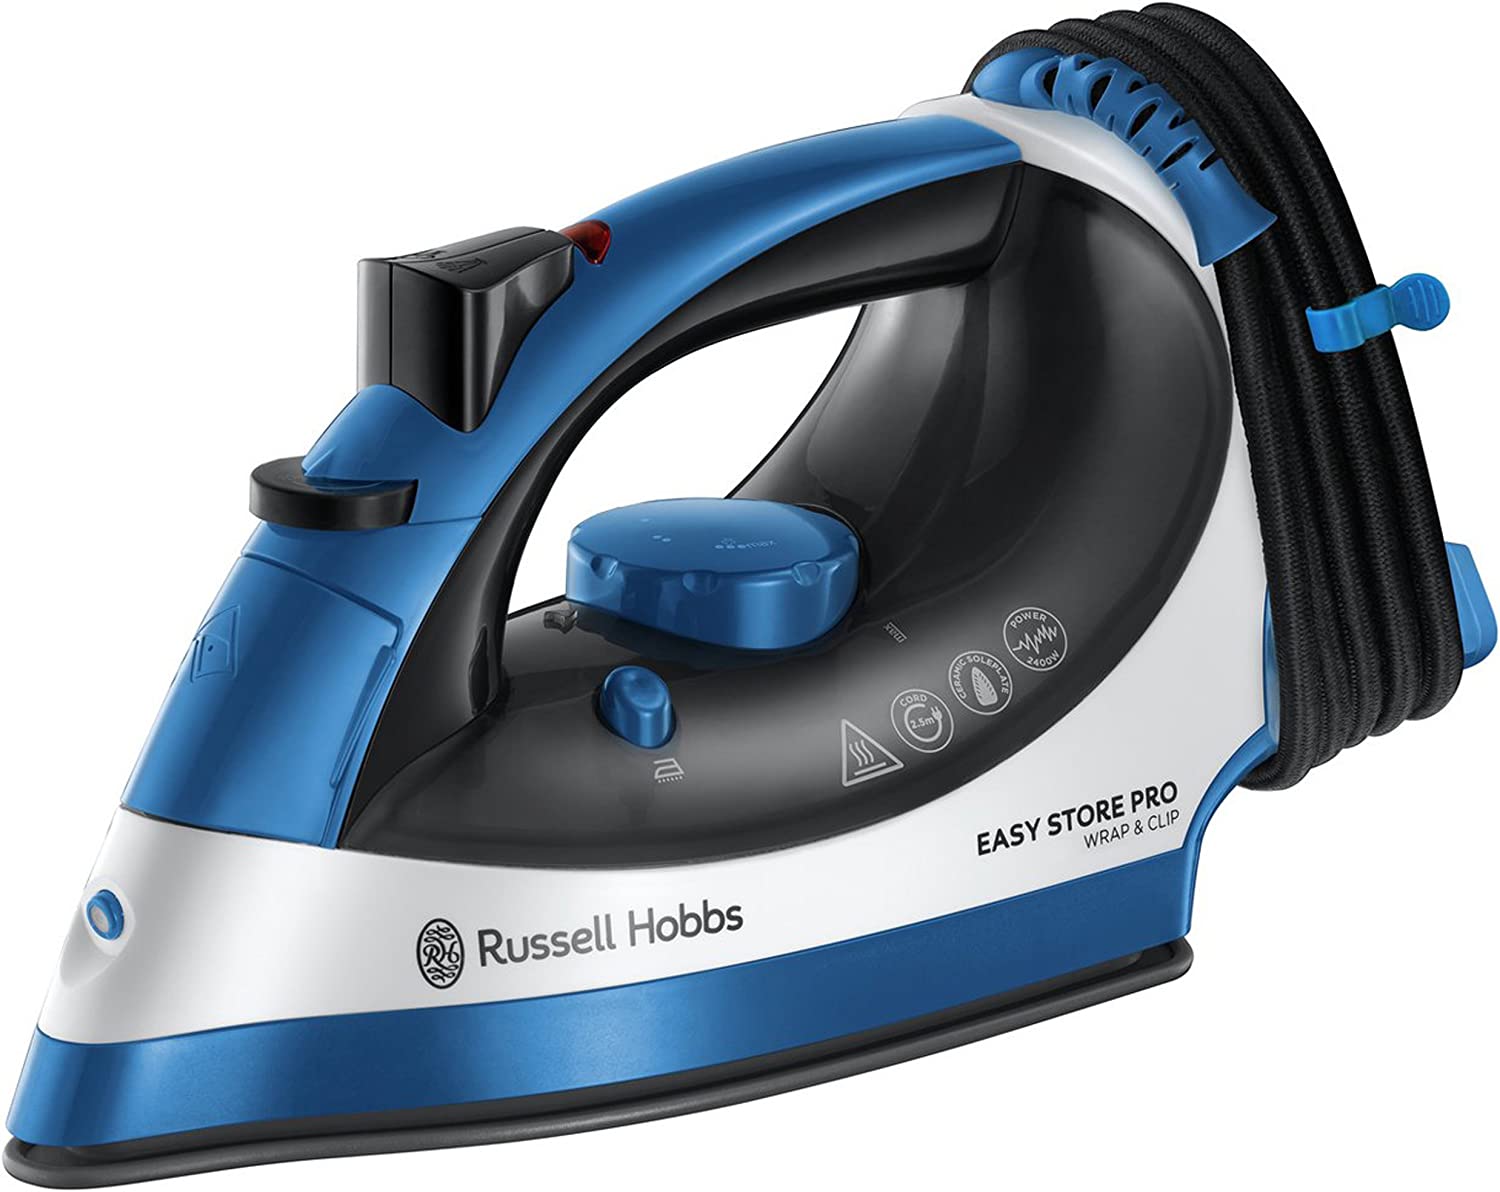 Russell Hobbs 23770 Easy Store Wrap and Clip Handheld Steam Iron with Vertical Garment Steamer Function, Blue and Black